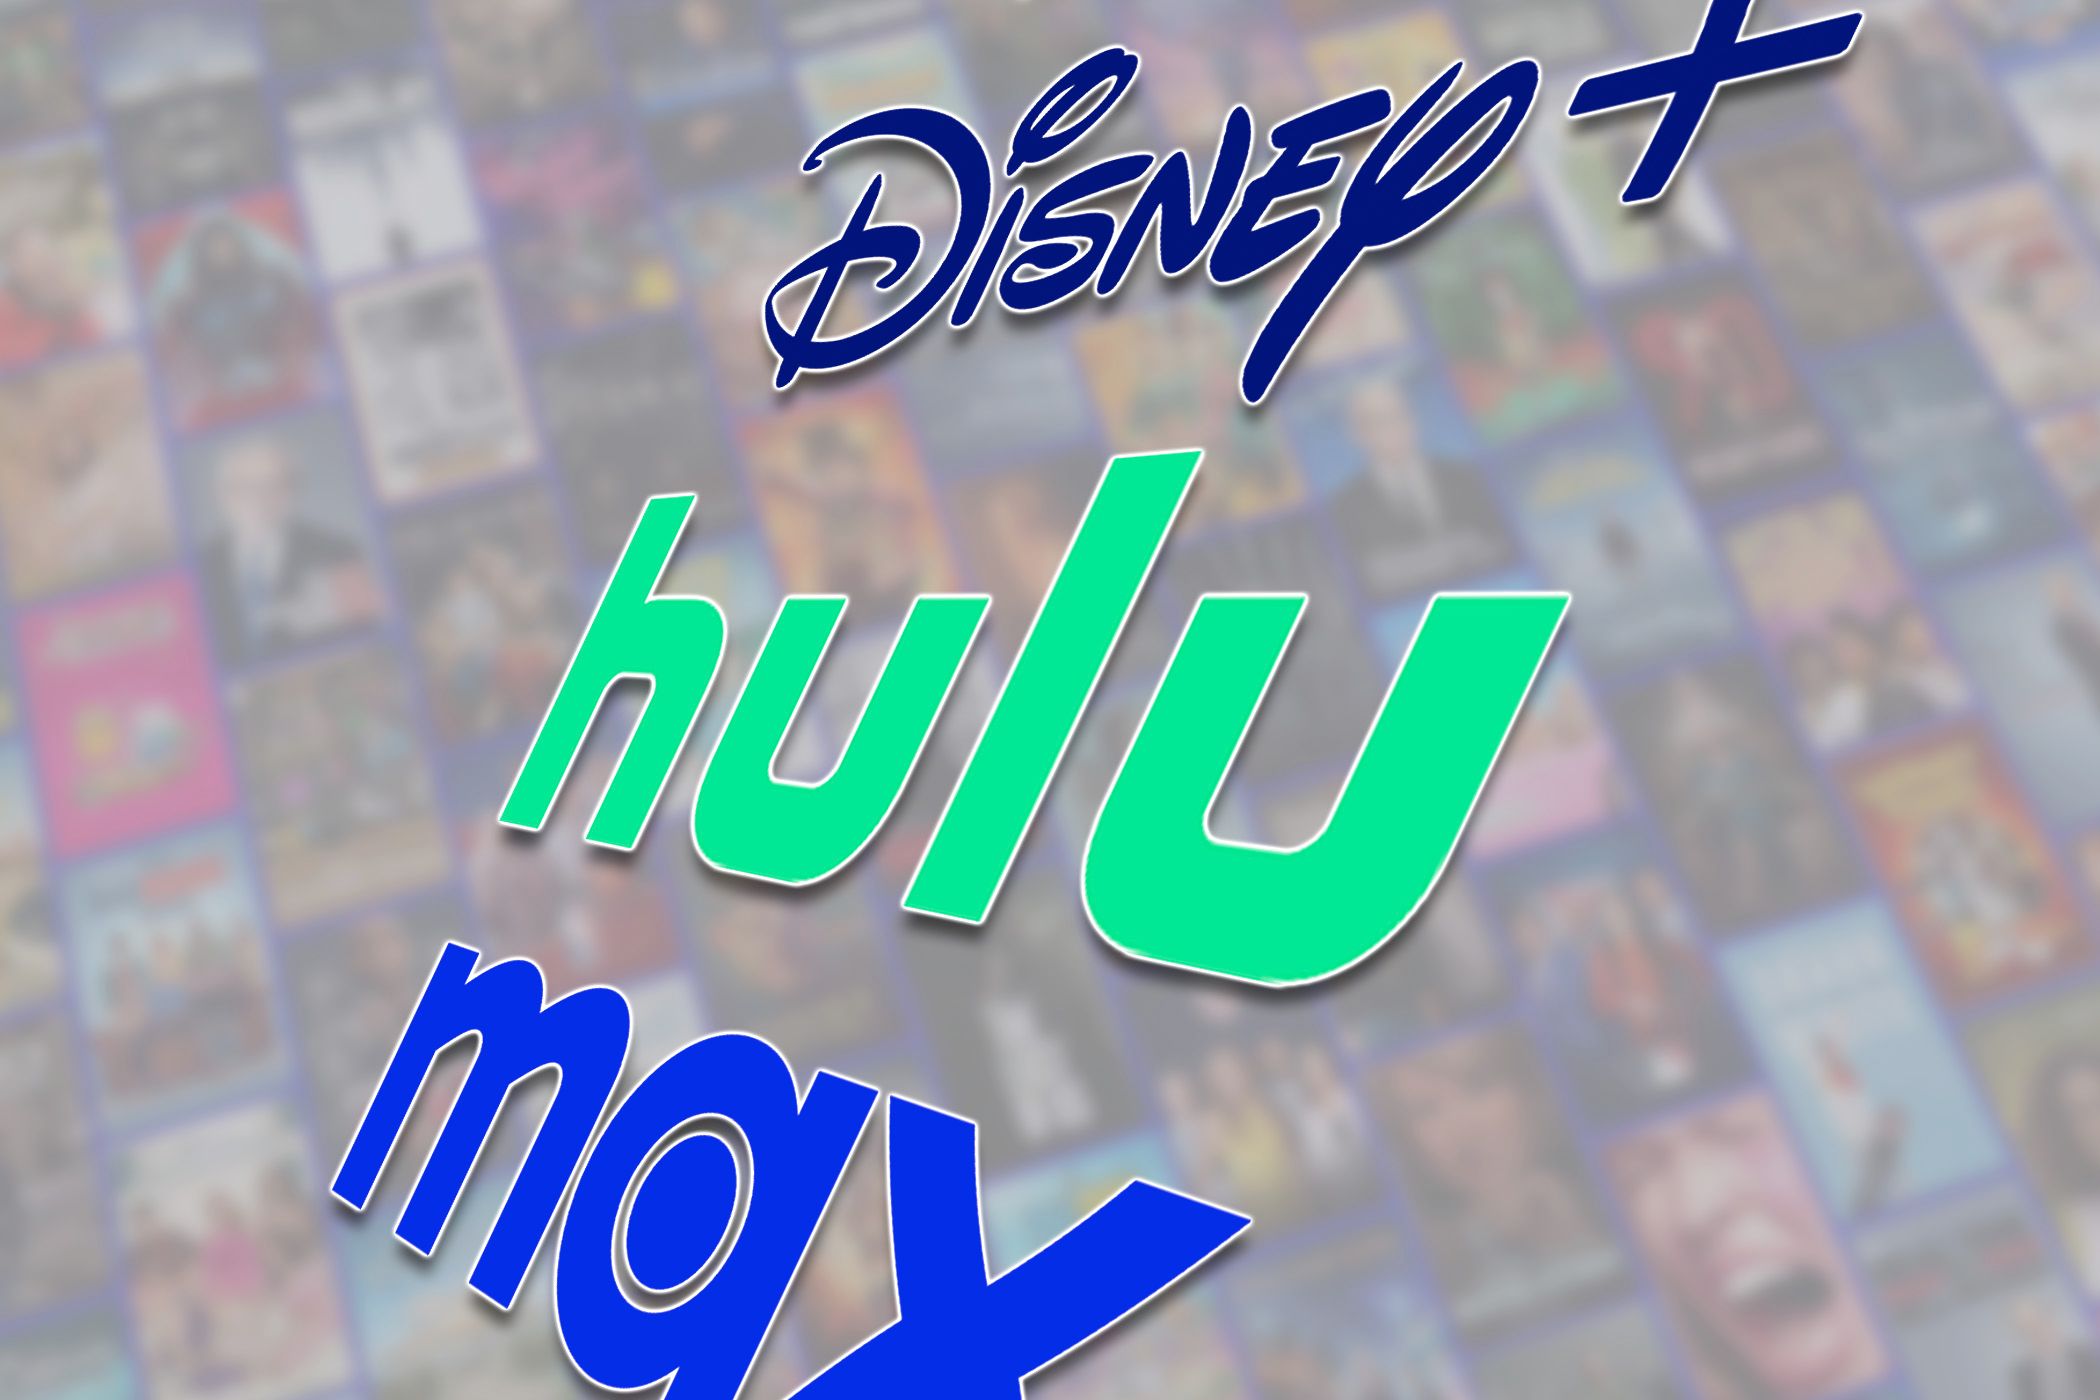 The Disney+, Hulu, and Max logos together.